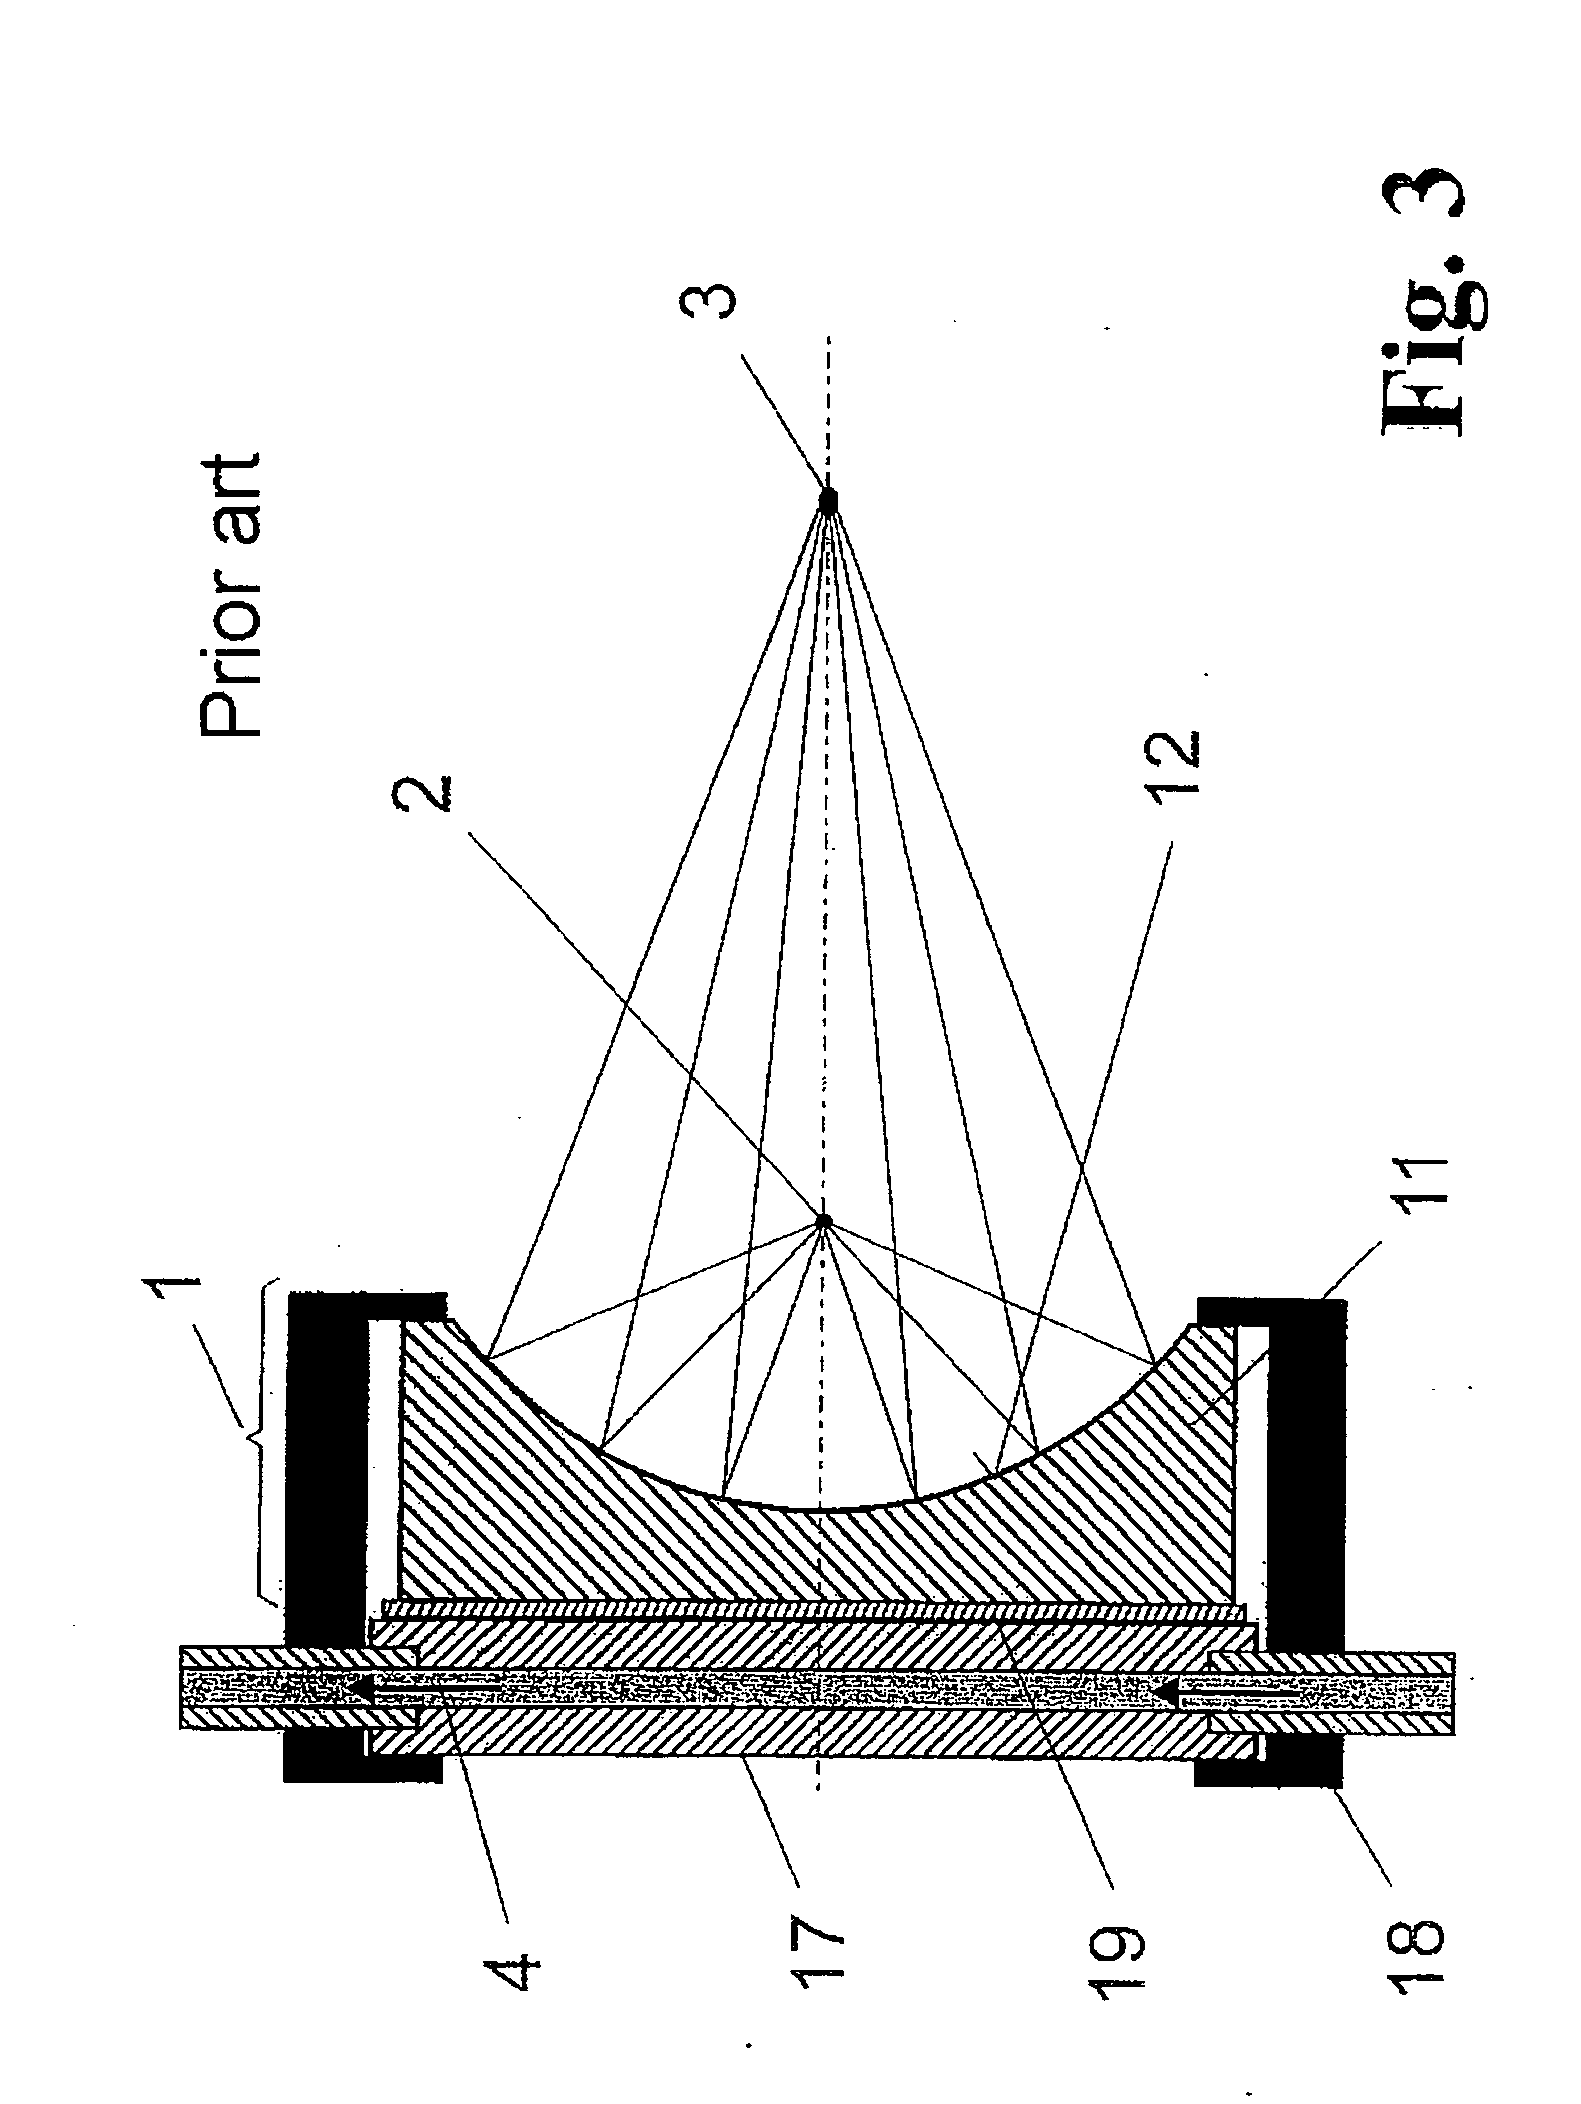 Collector mirror for plasma-based, short-wavelength radiation sources